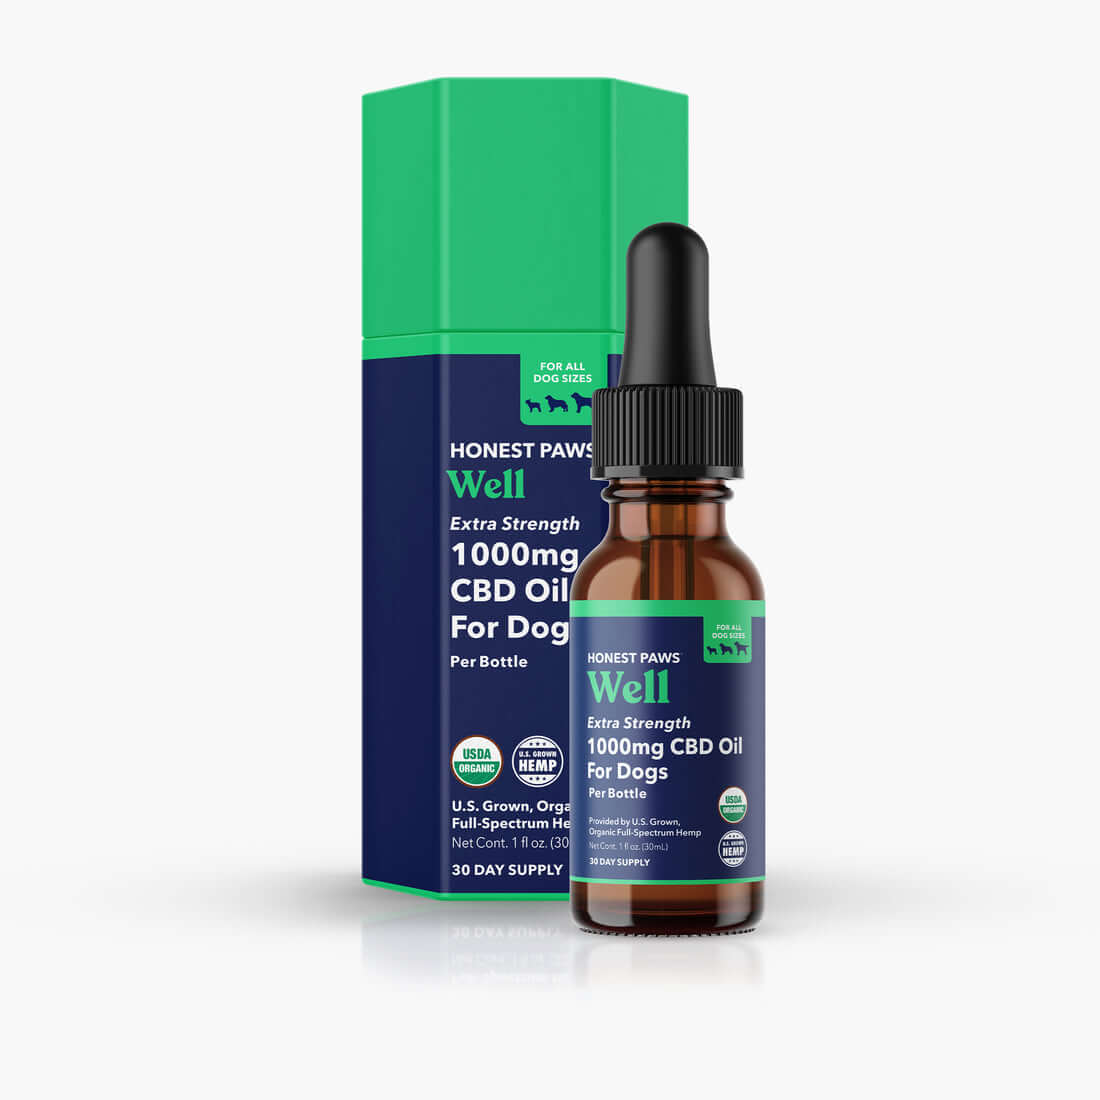 Extra Strength CBD Oil for Dogs - Well image